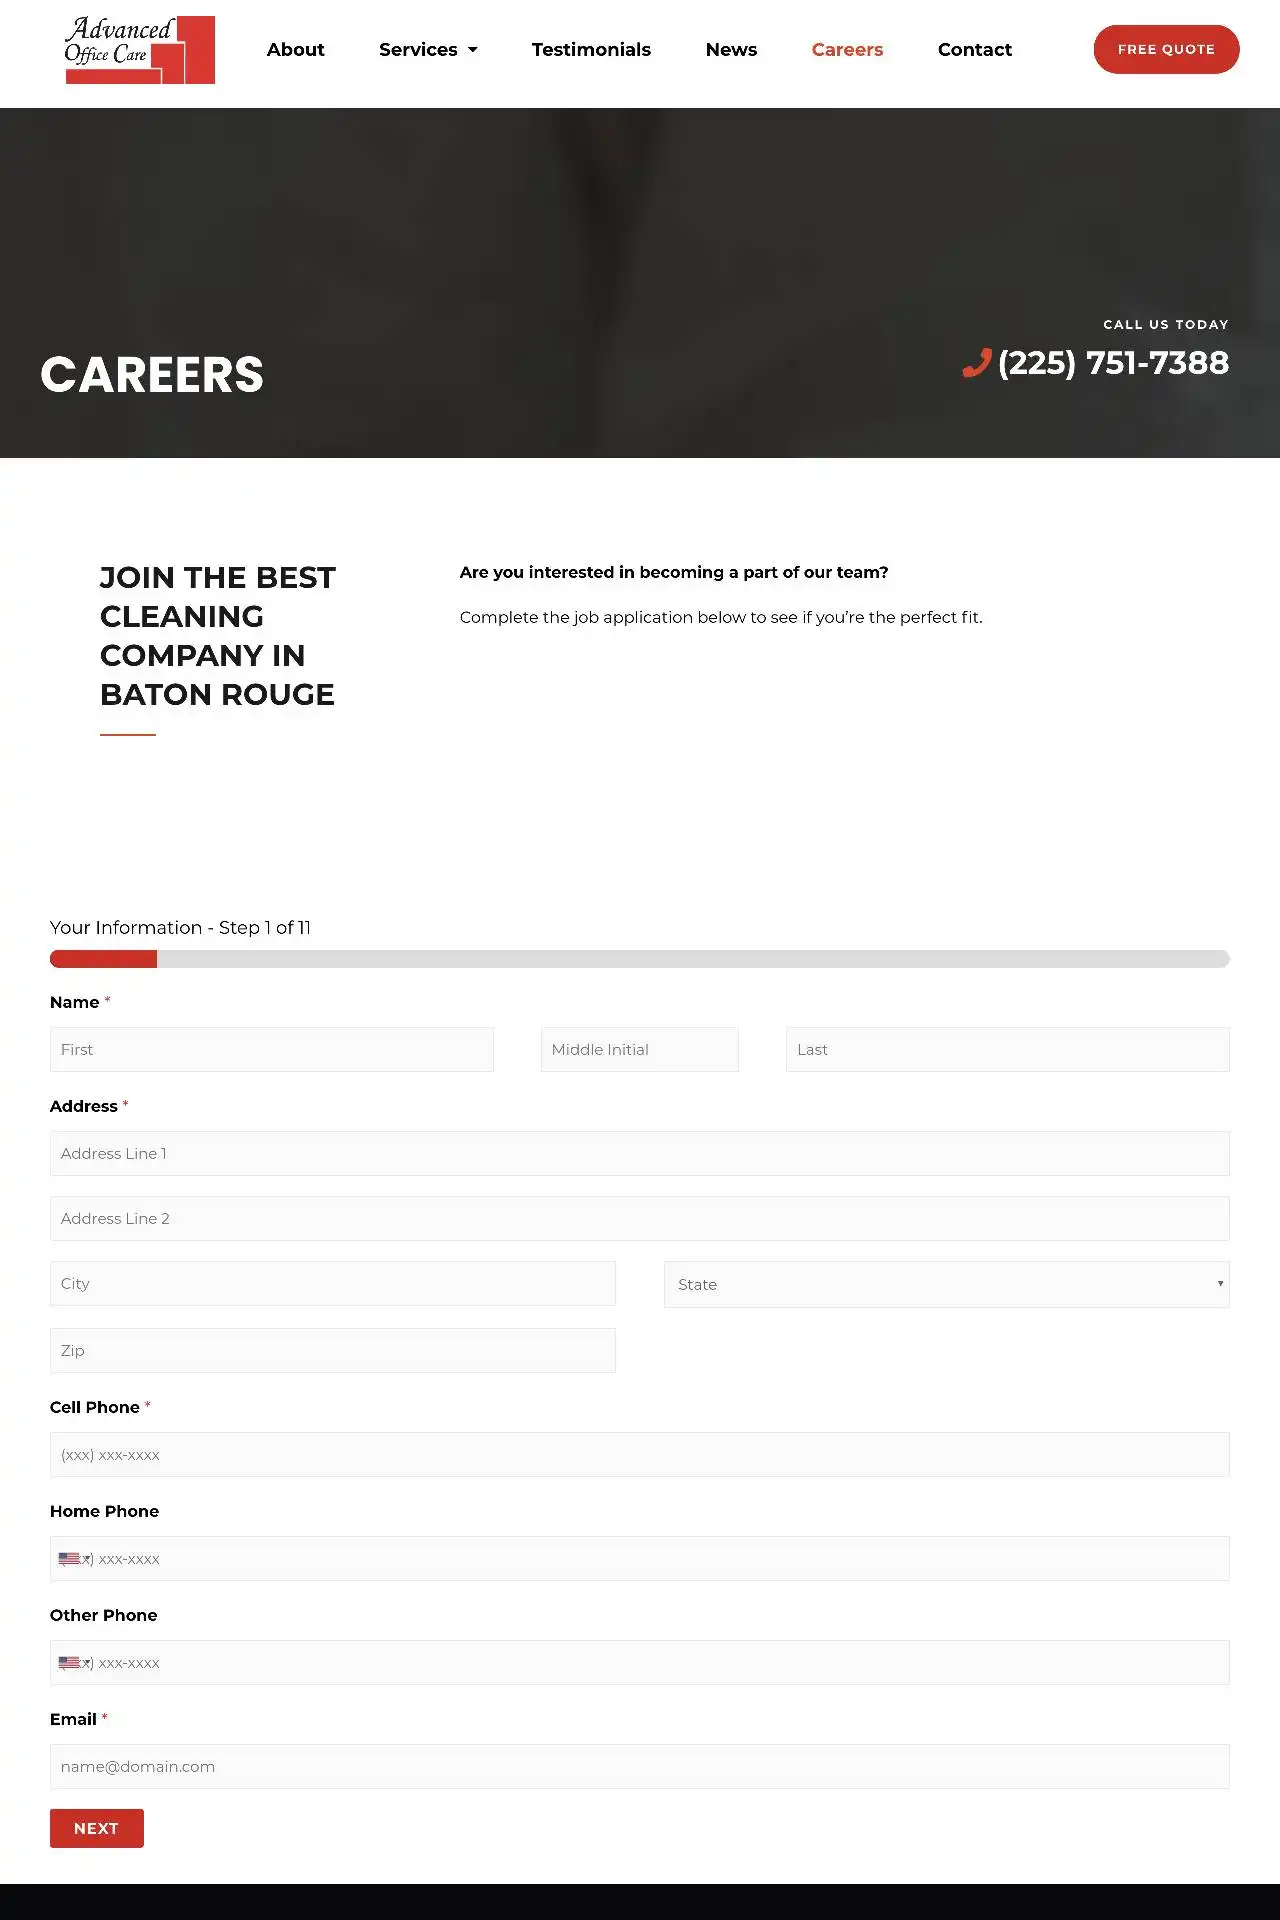 baton rouge cleaning company website design development https aocla.com about careers